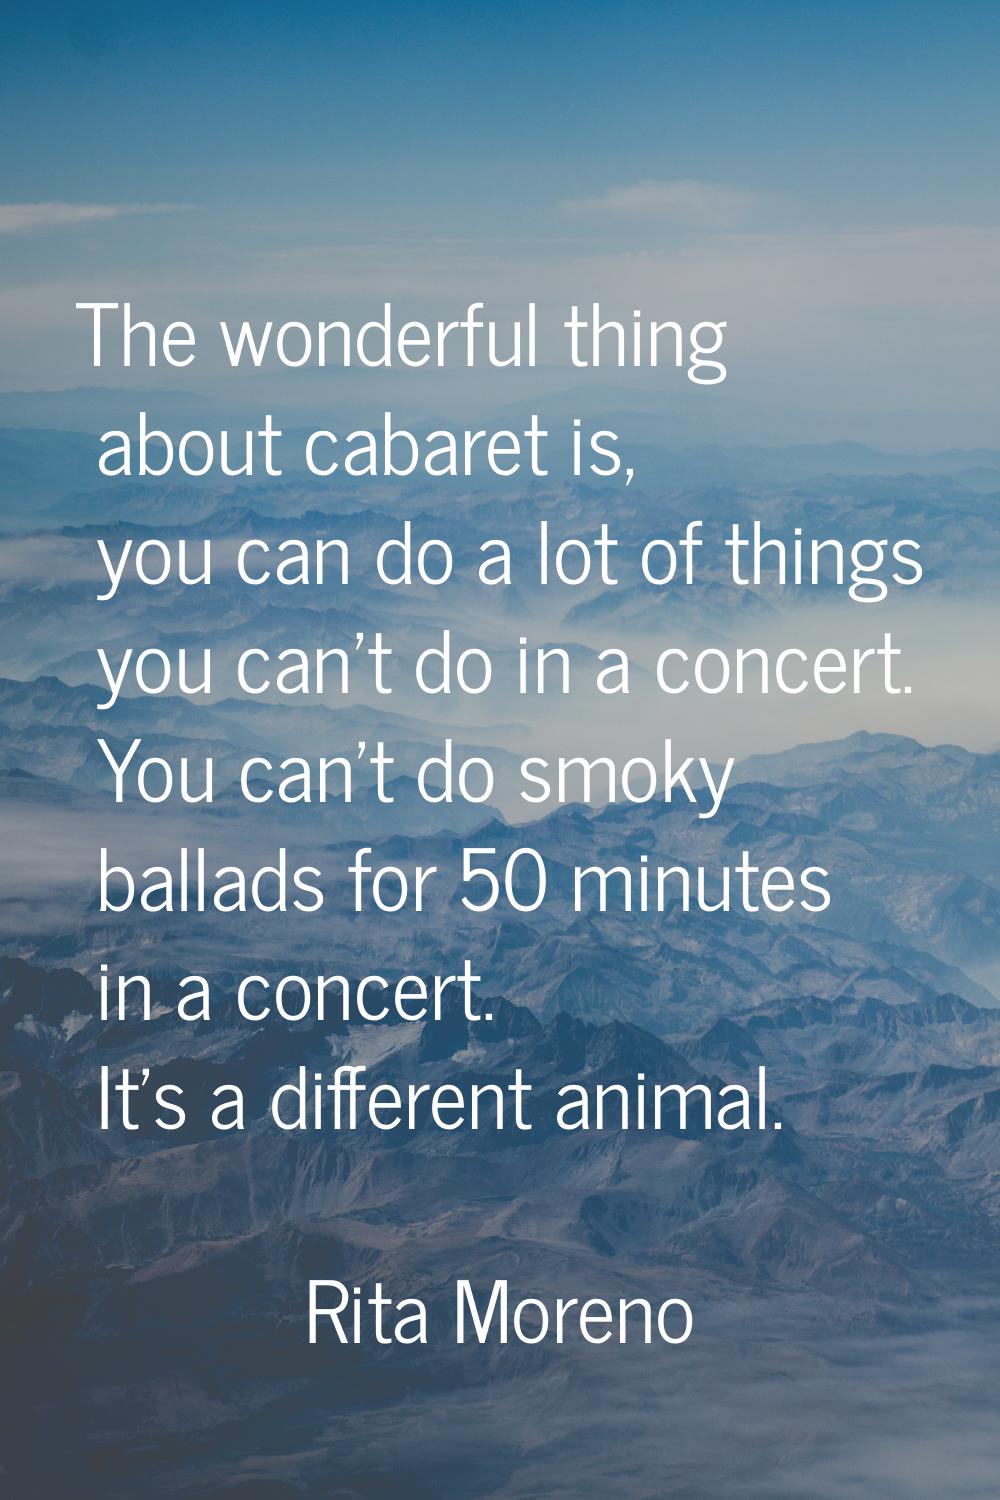 The wonderful thing about cabaret is, you can do a lot of things you can't do in a concert. You can